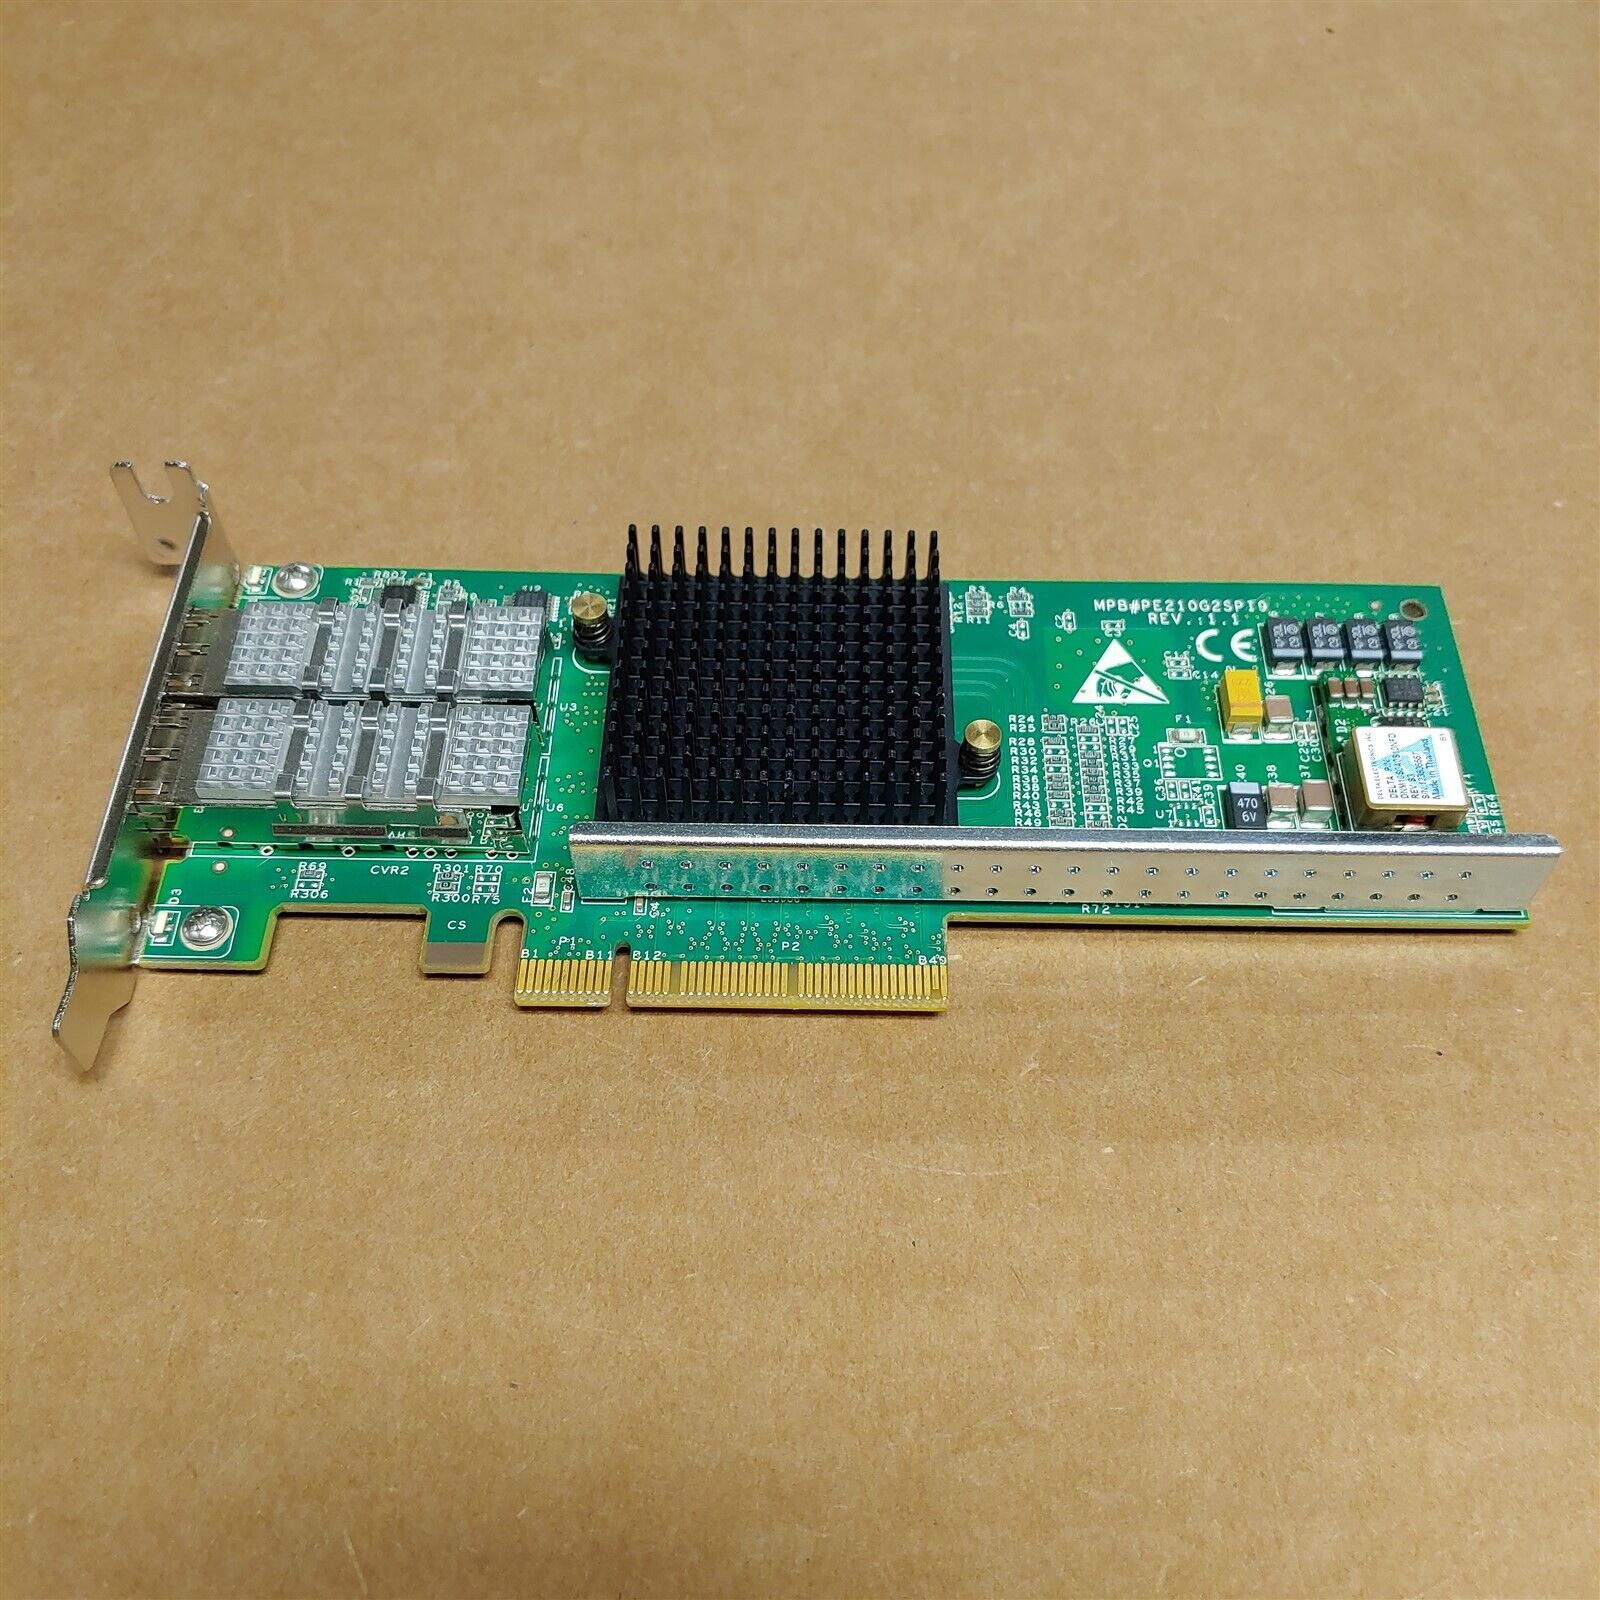 Silicom PE210G2SPI9-XR Dual 10GbPS PCIe 2.0 x8 Low Profile Network Card